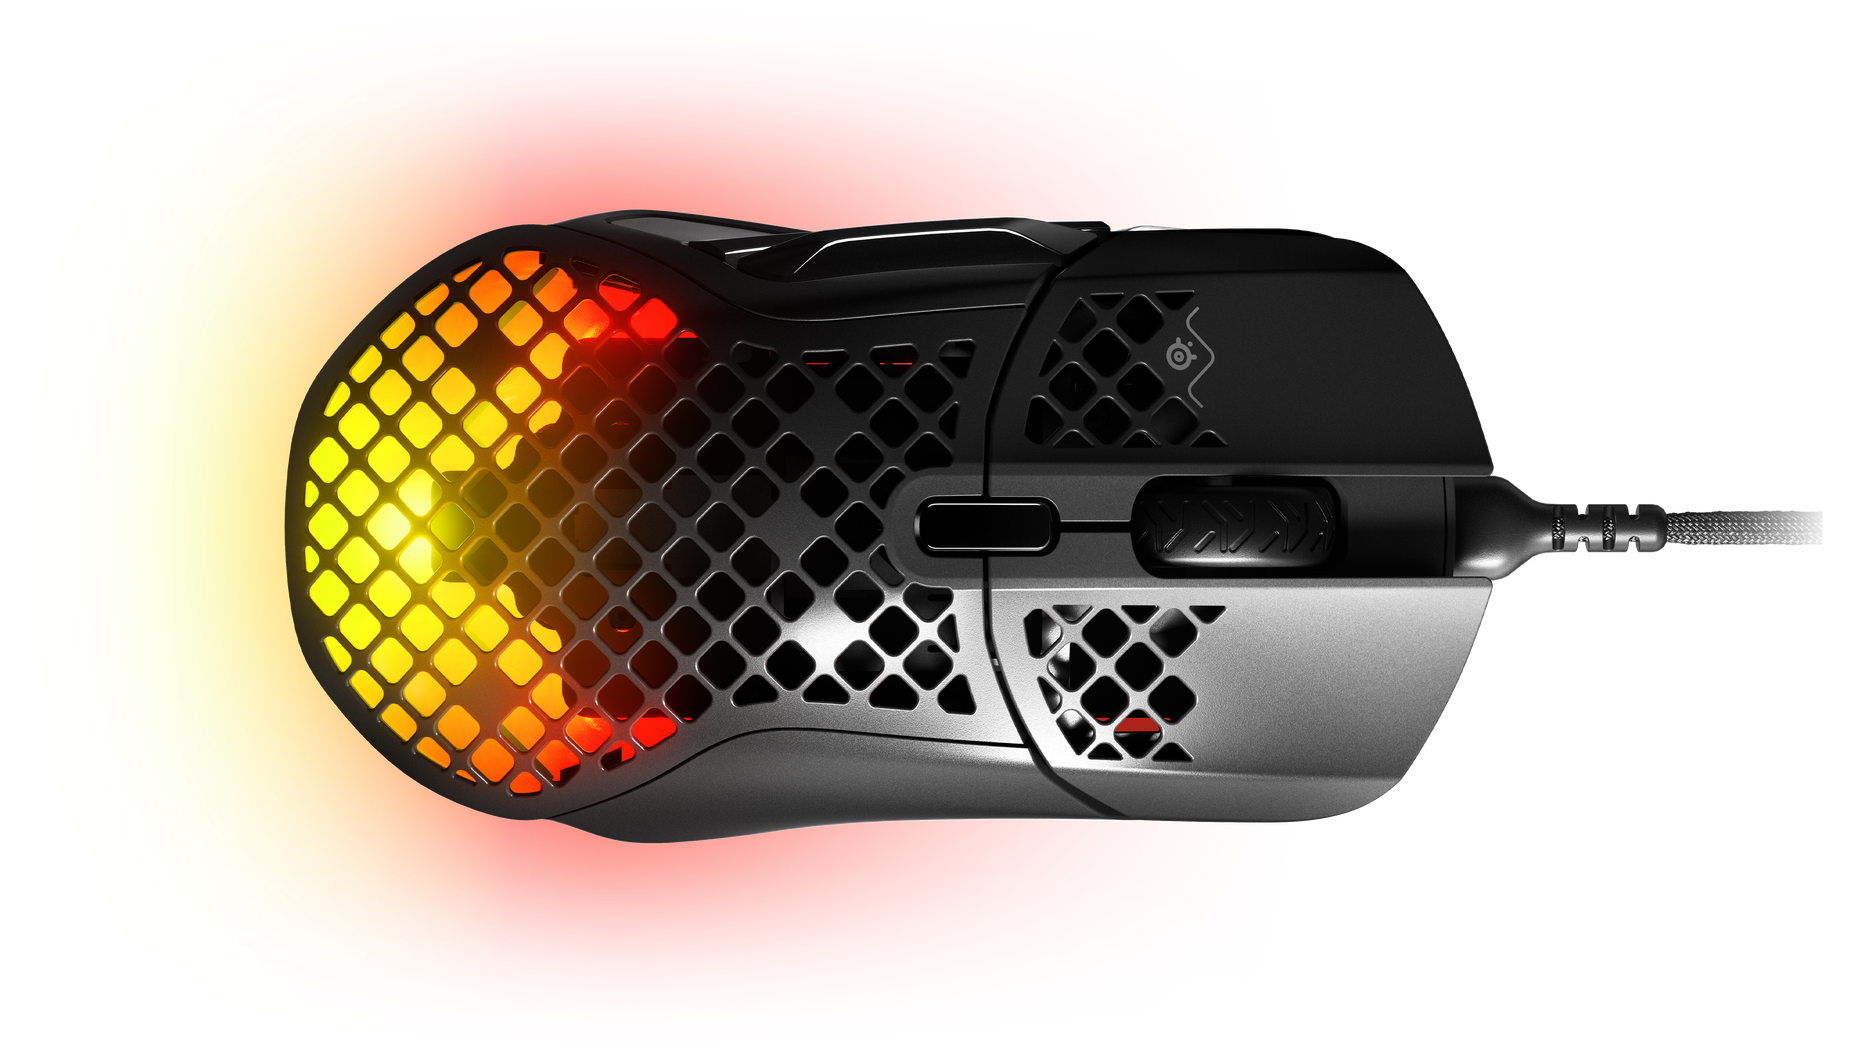 
 A top-down view of the Aerox 5 mouse.
 